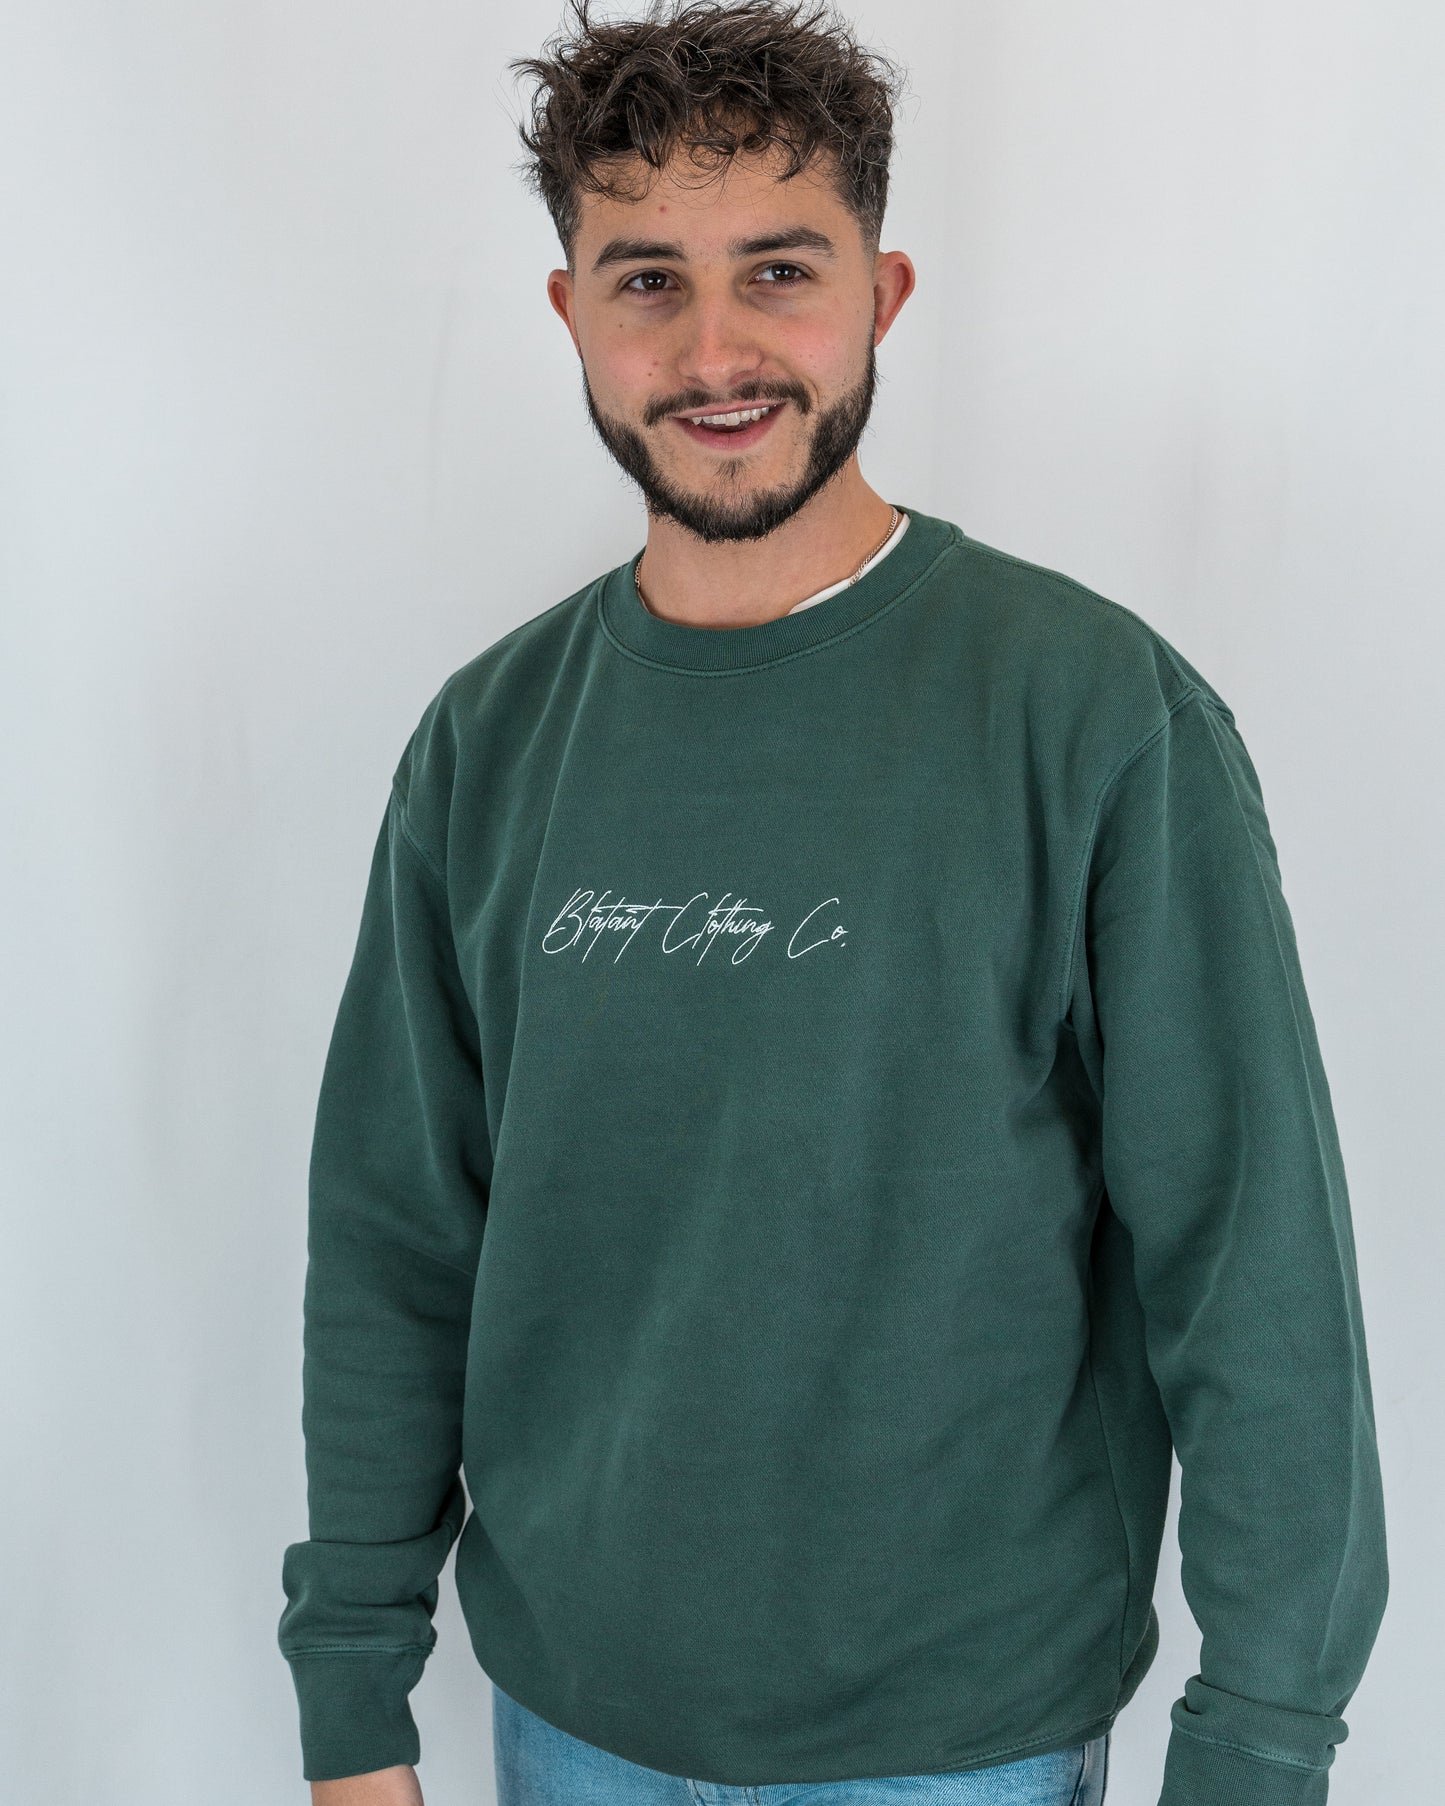 The Blatant Signature Embroidered Crew Neck